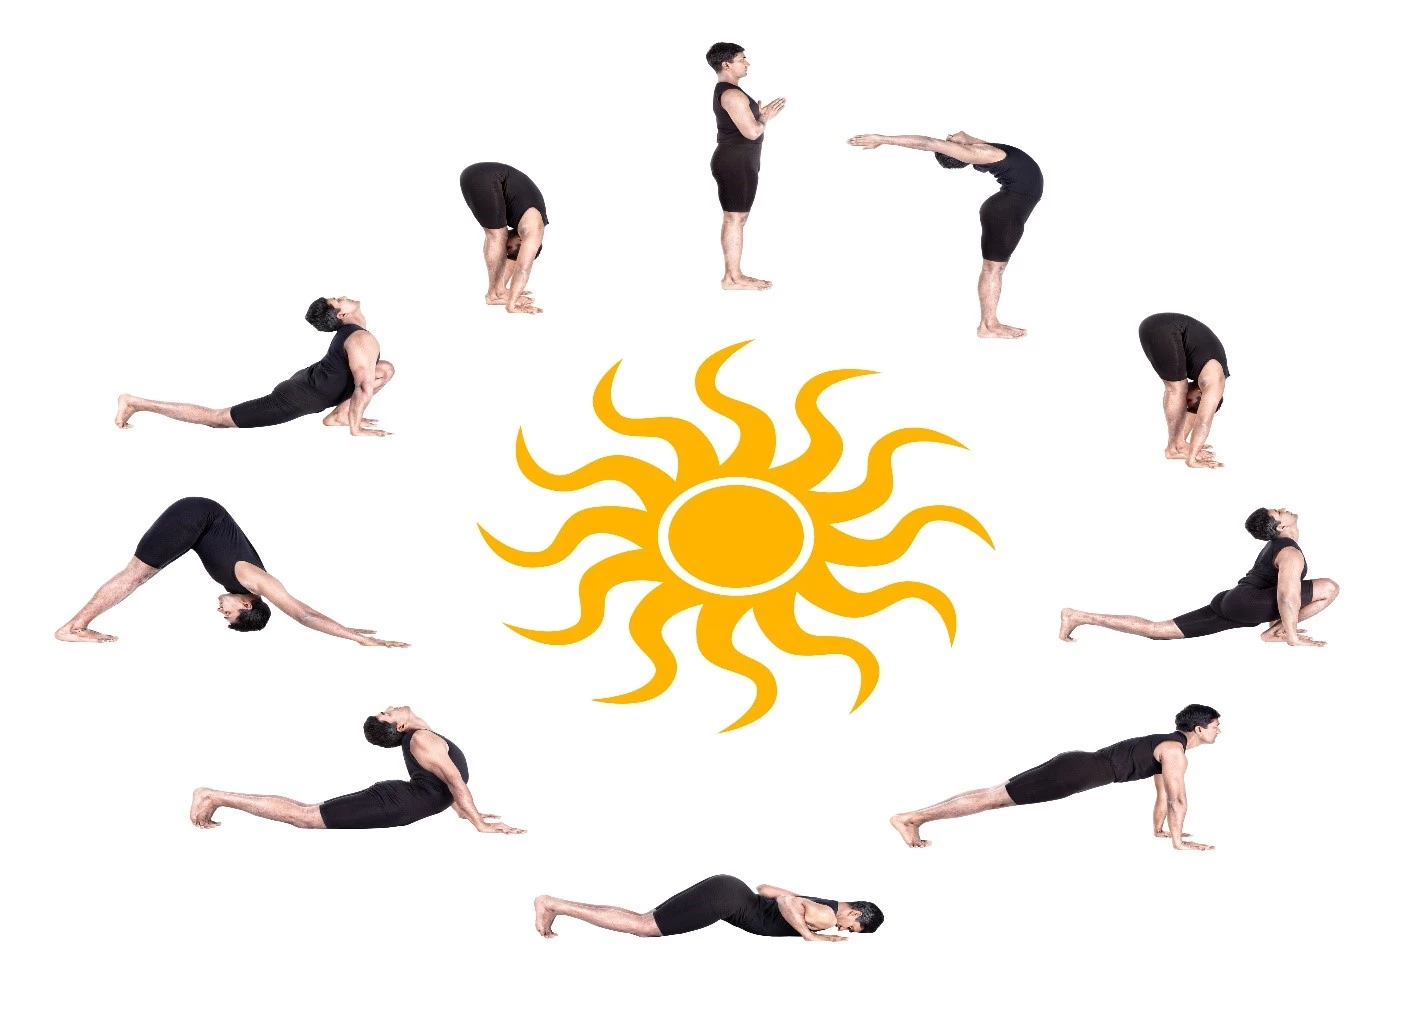 What difference will 5 sun salutations make?